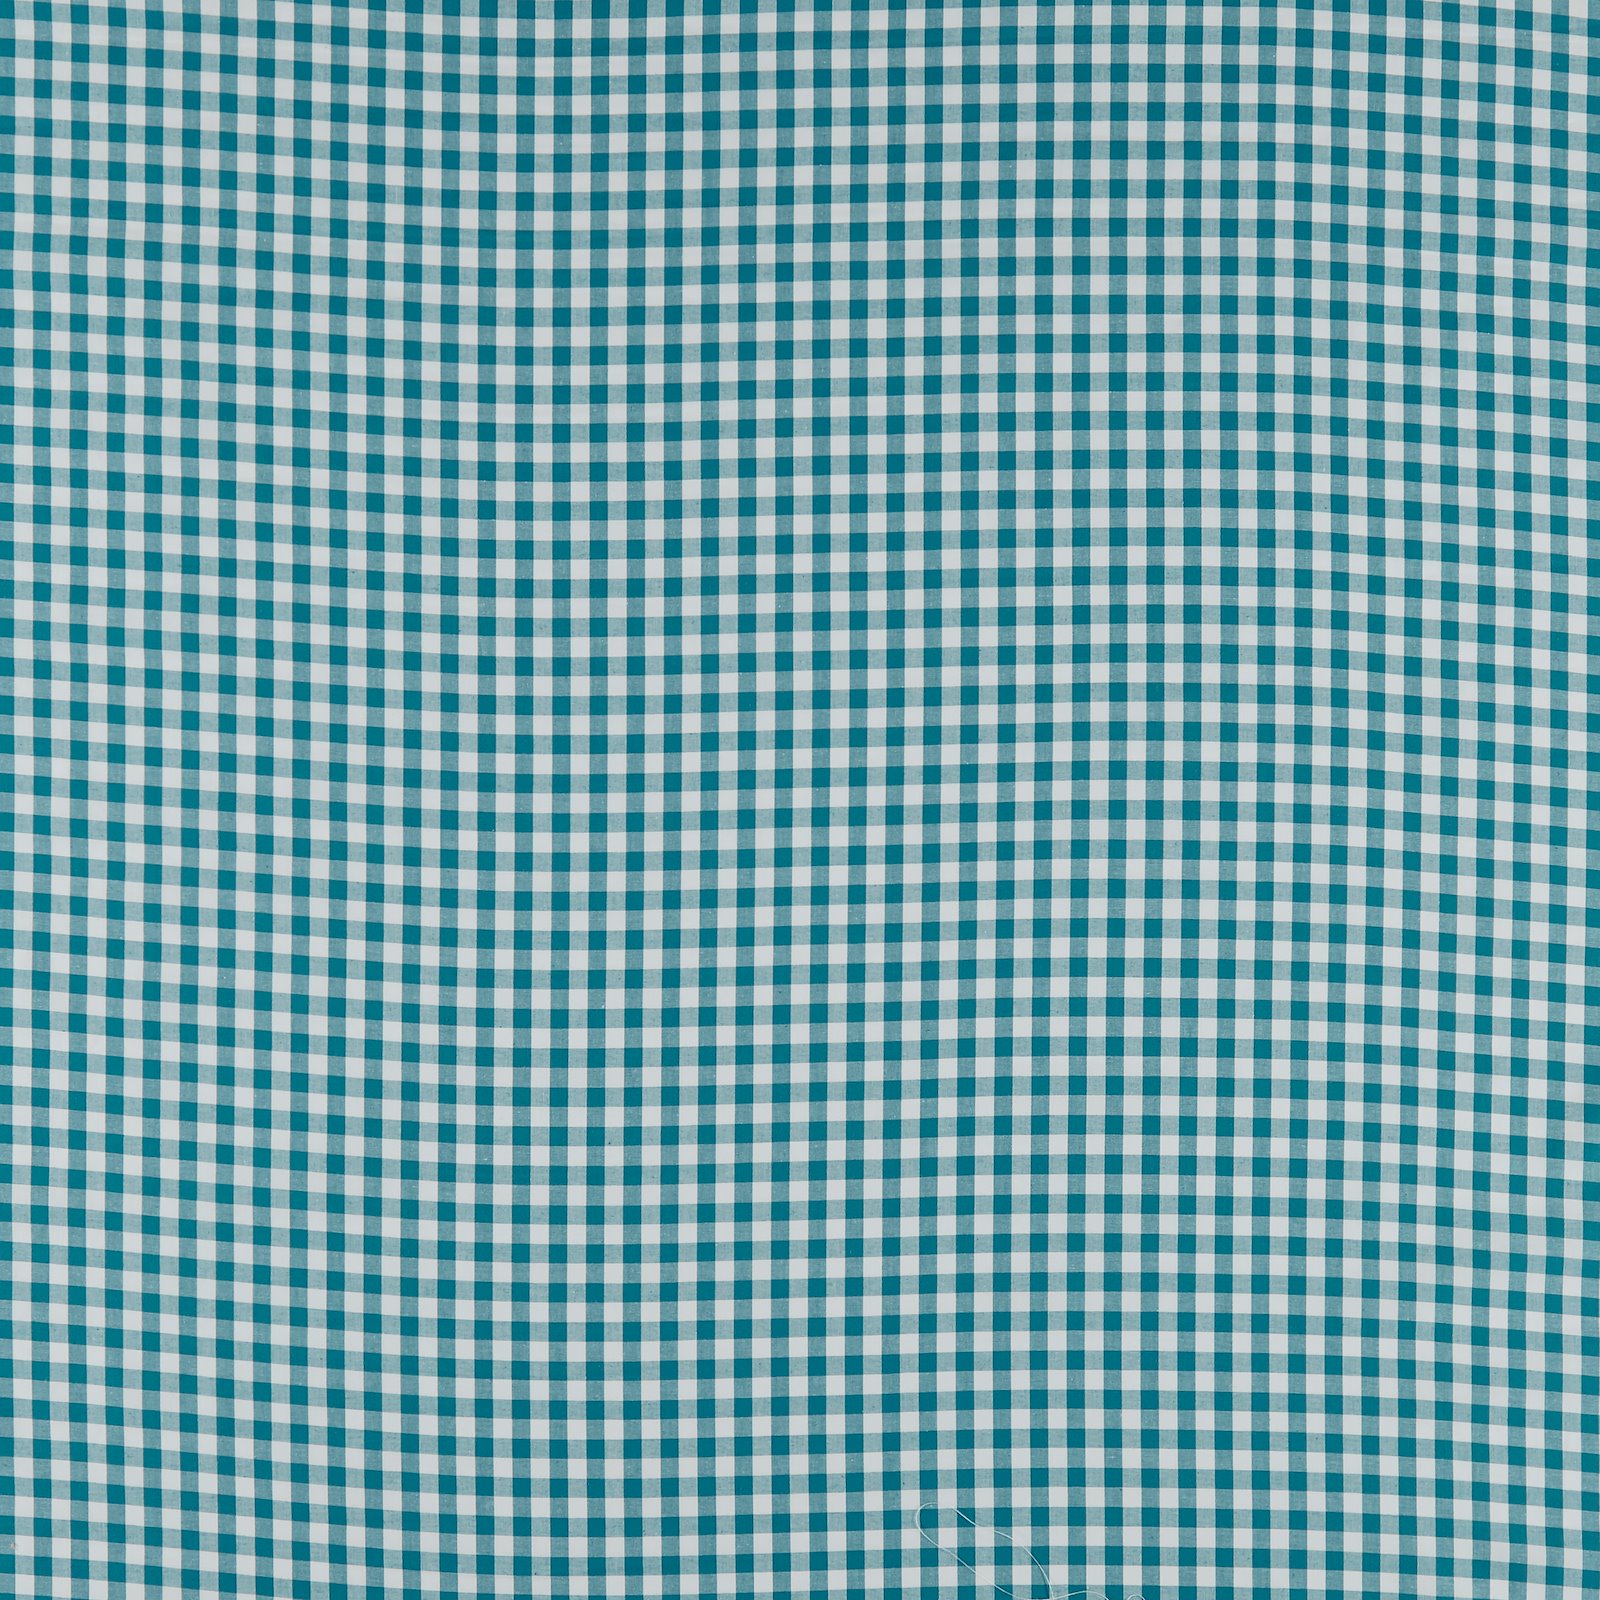 Cotton YD dark turquoise/white check 780907_pack_sp